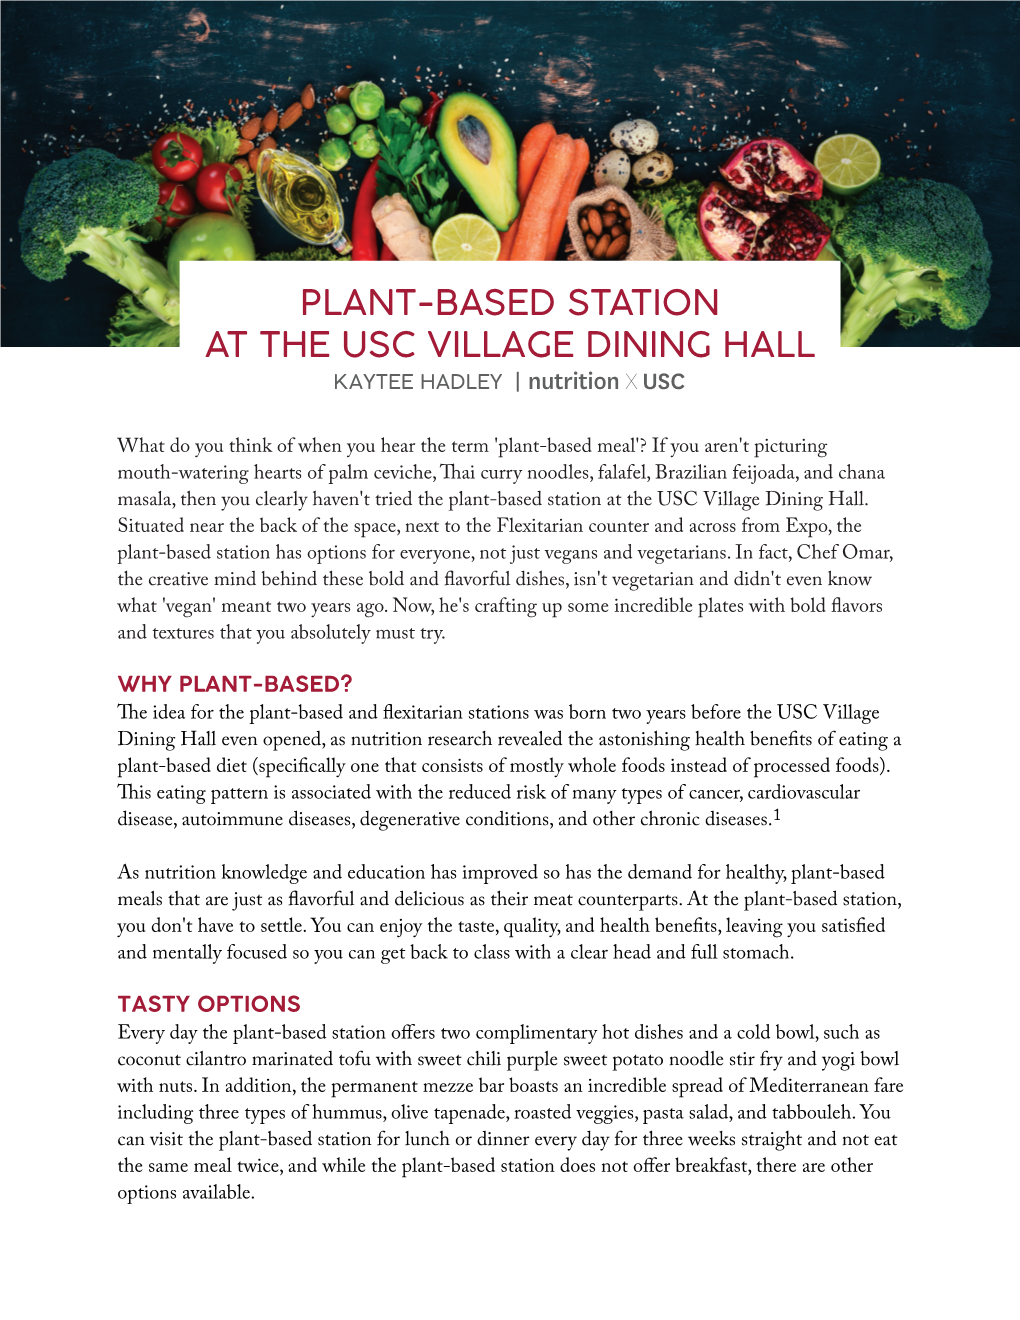 PLANT-BASED STATION at the USC VILLAGE DINING HALL KAYTEE HADLEY Nutrition X USC